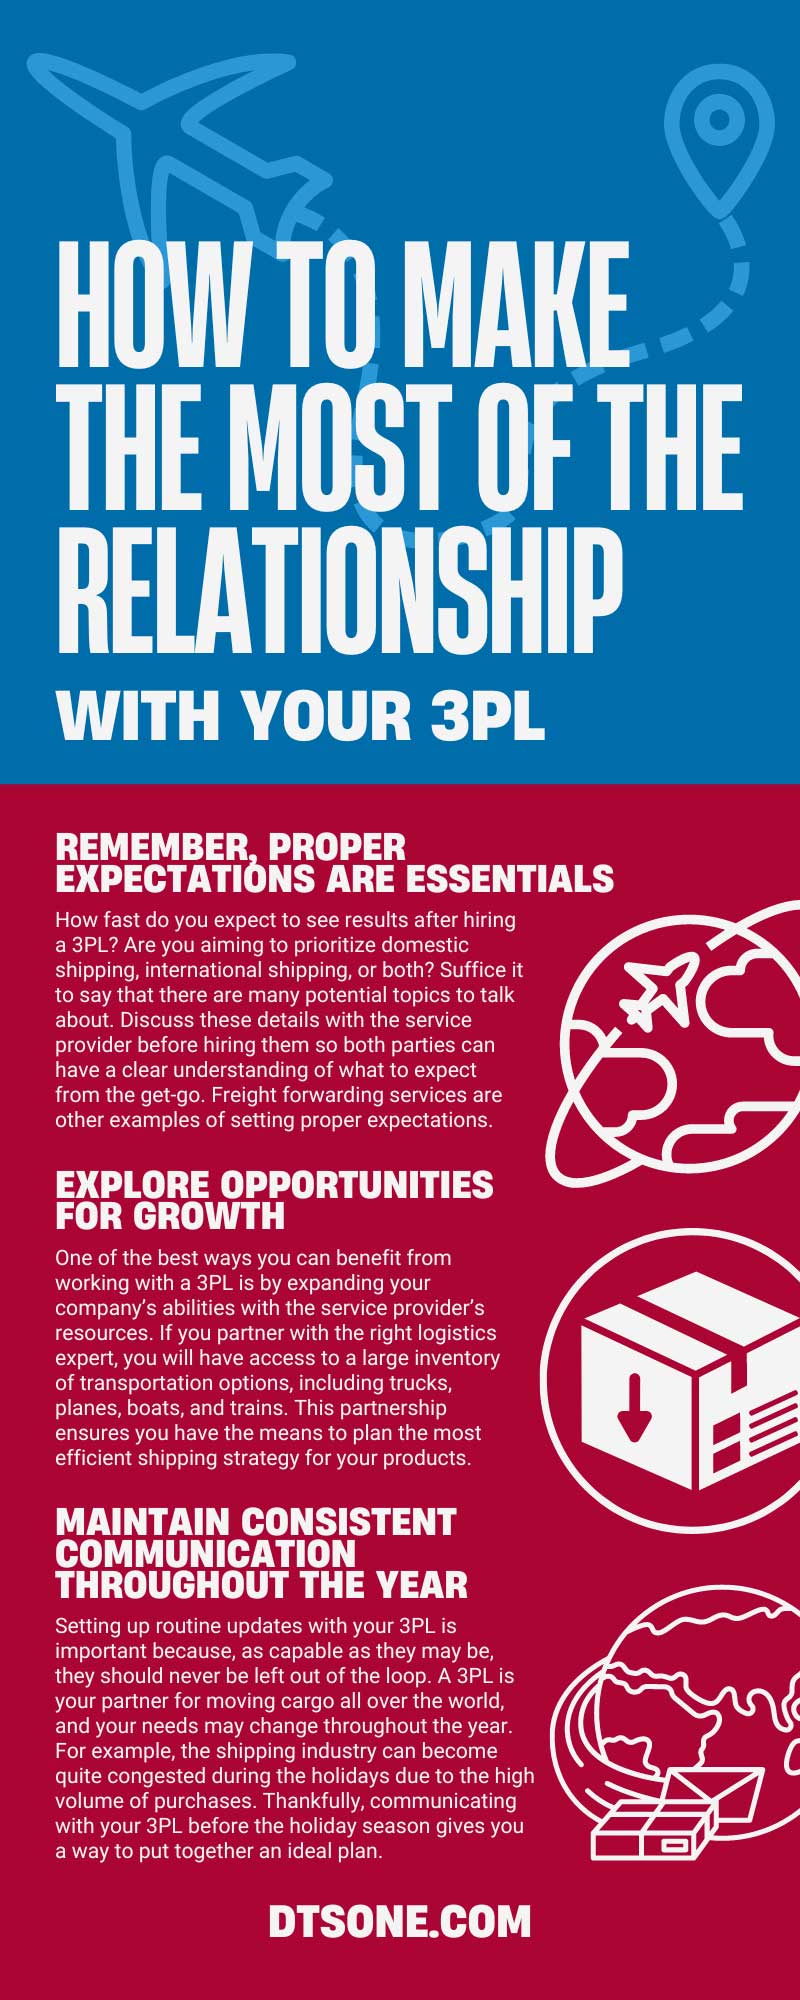 How To Make the Most of the Relationship With Your 3PL